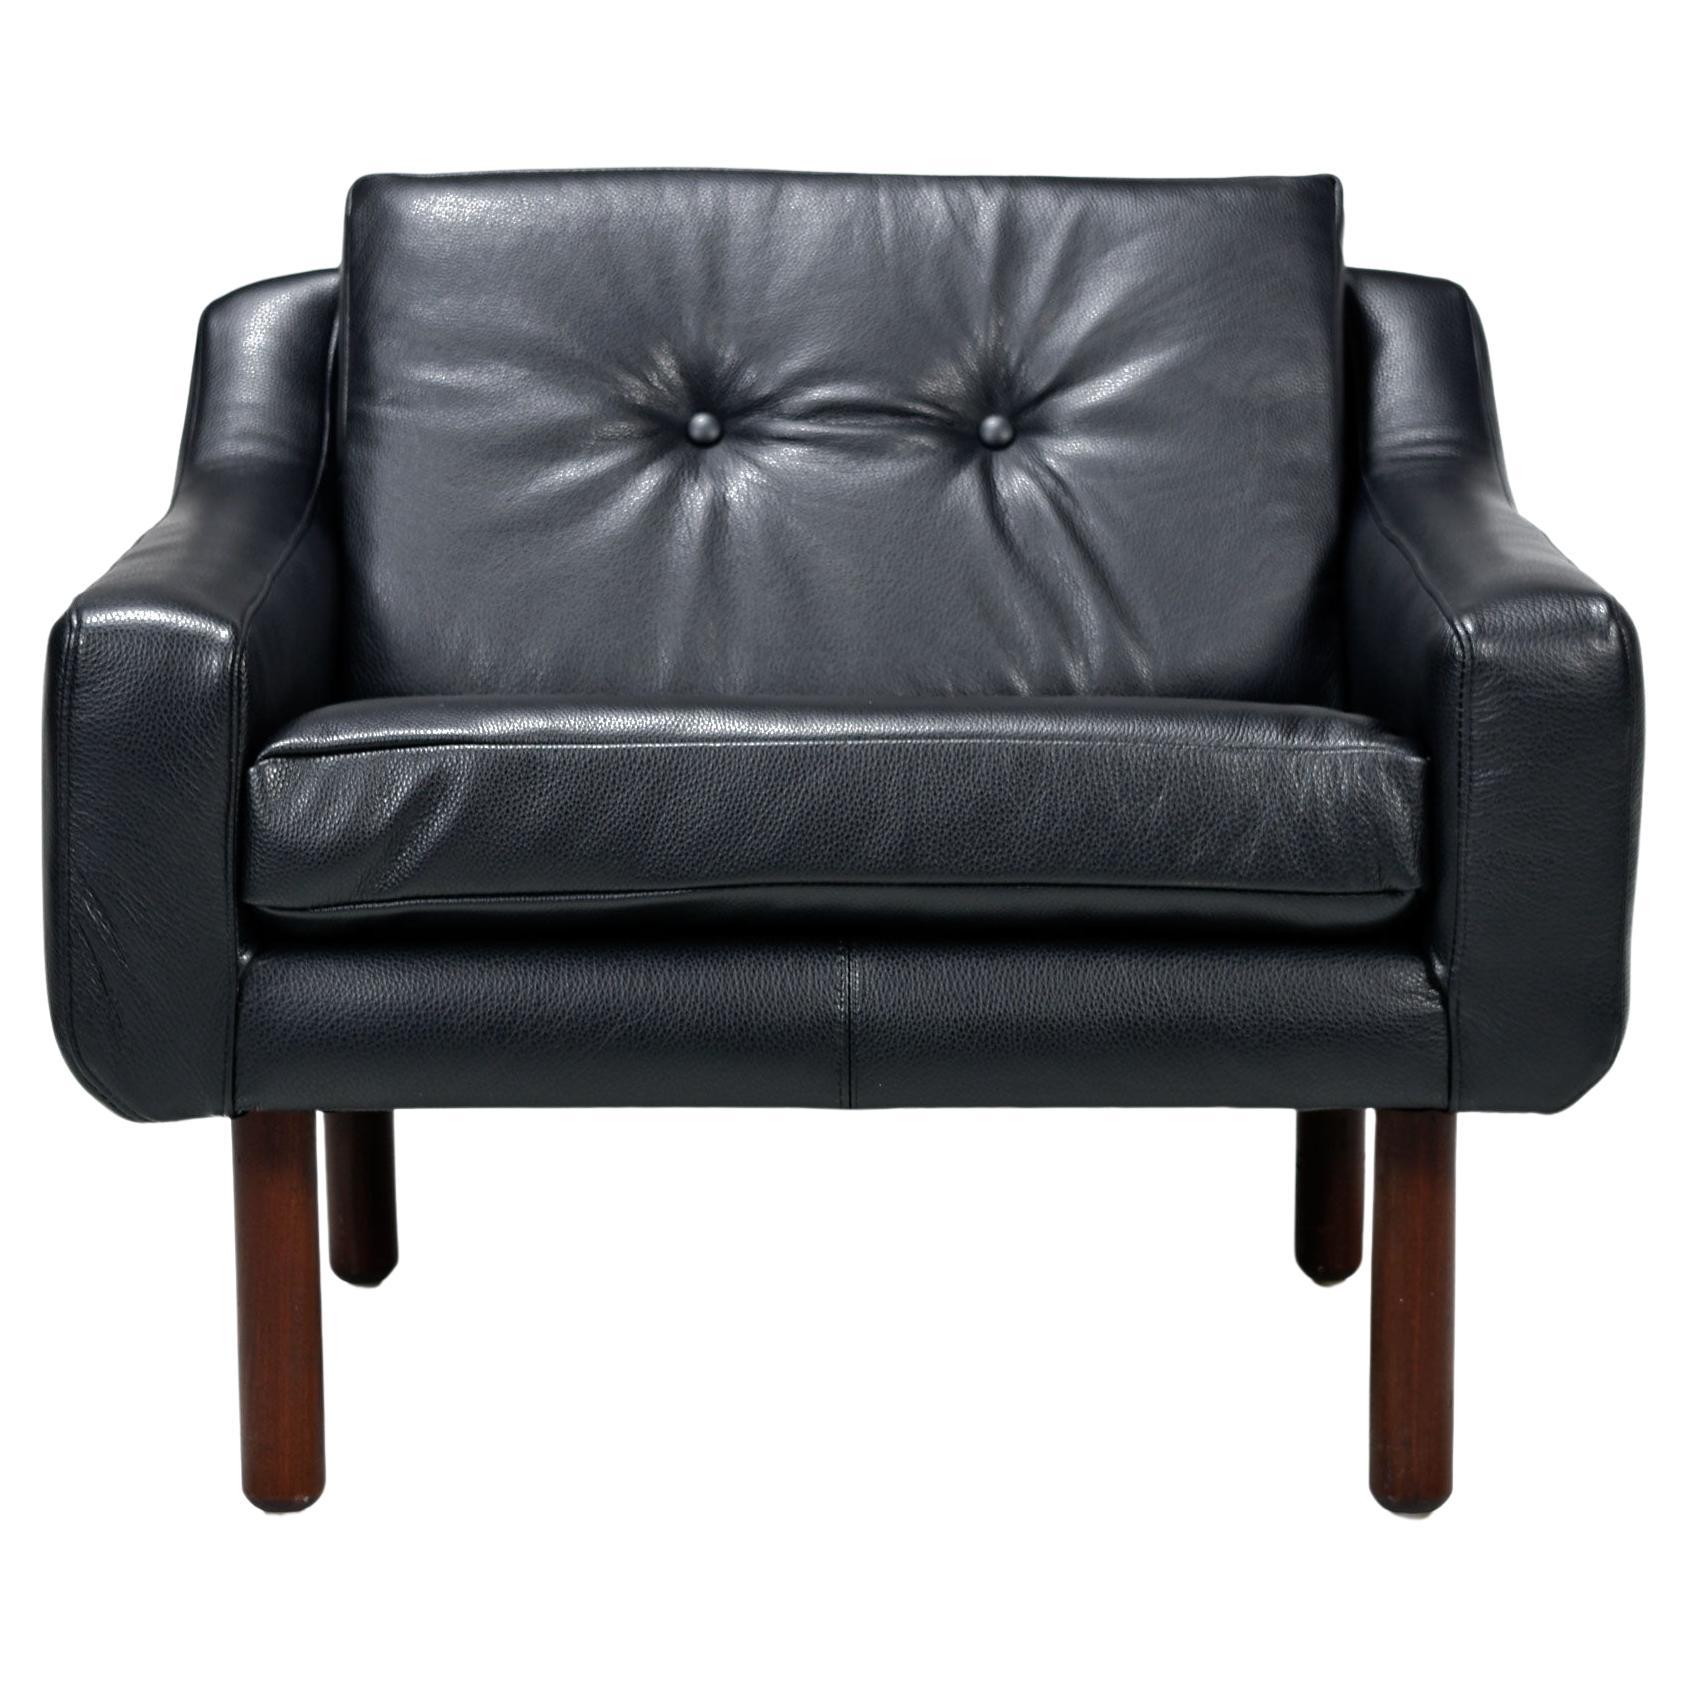 Fully restored with new luxurious black leather. This Mid-Century Modern lounge chair had no marking, but it's clearly in the style of Frits Henningsen and Svend Skipper, made in the 1960s. This low-back armchair features a sleek profile in the